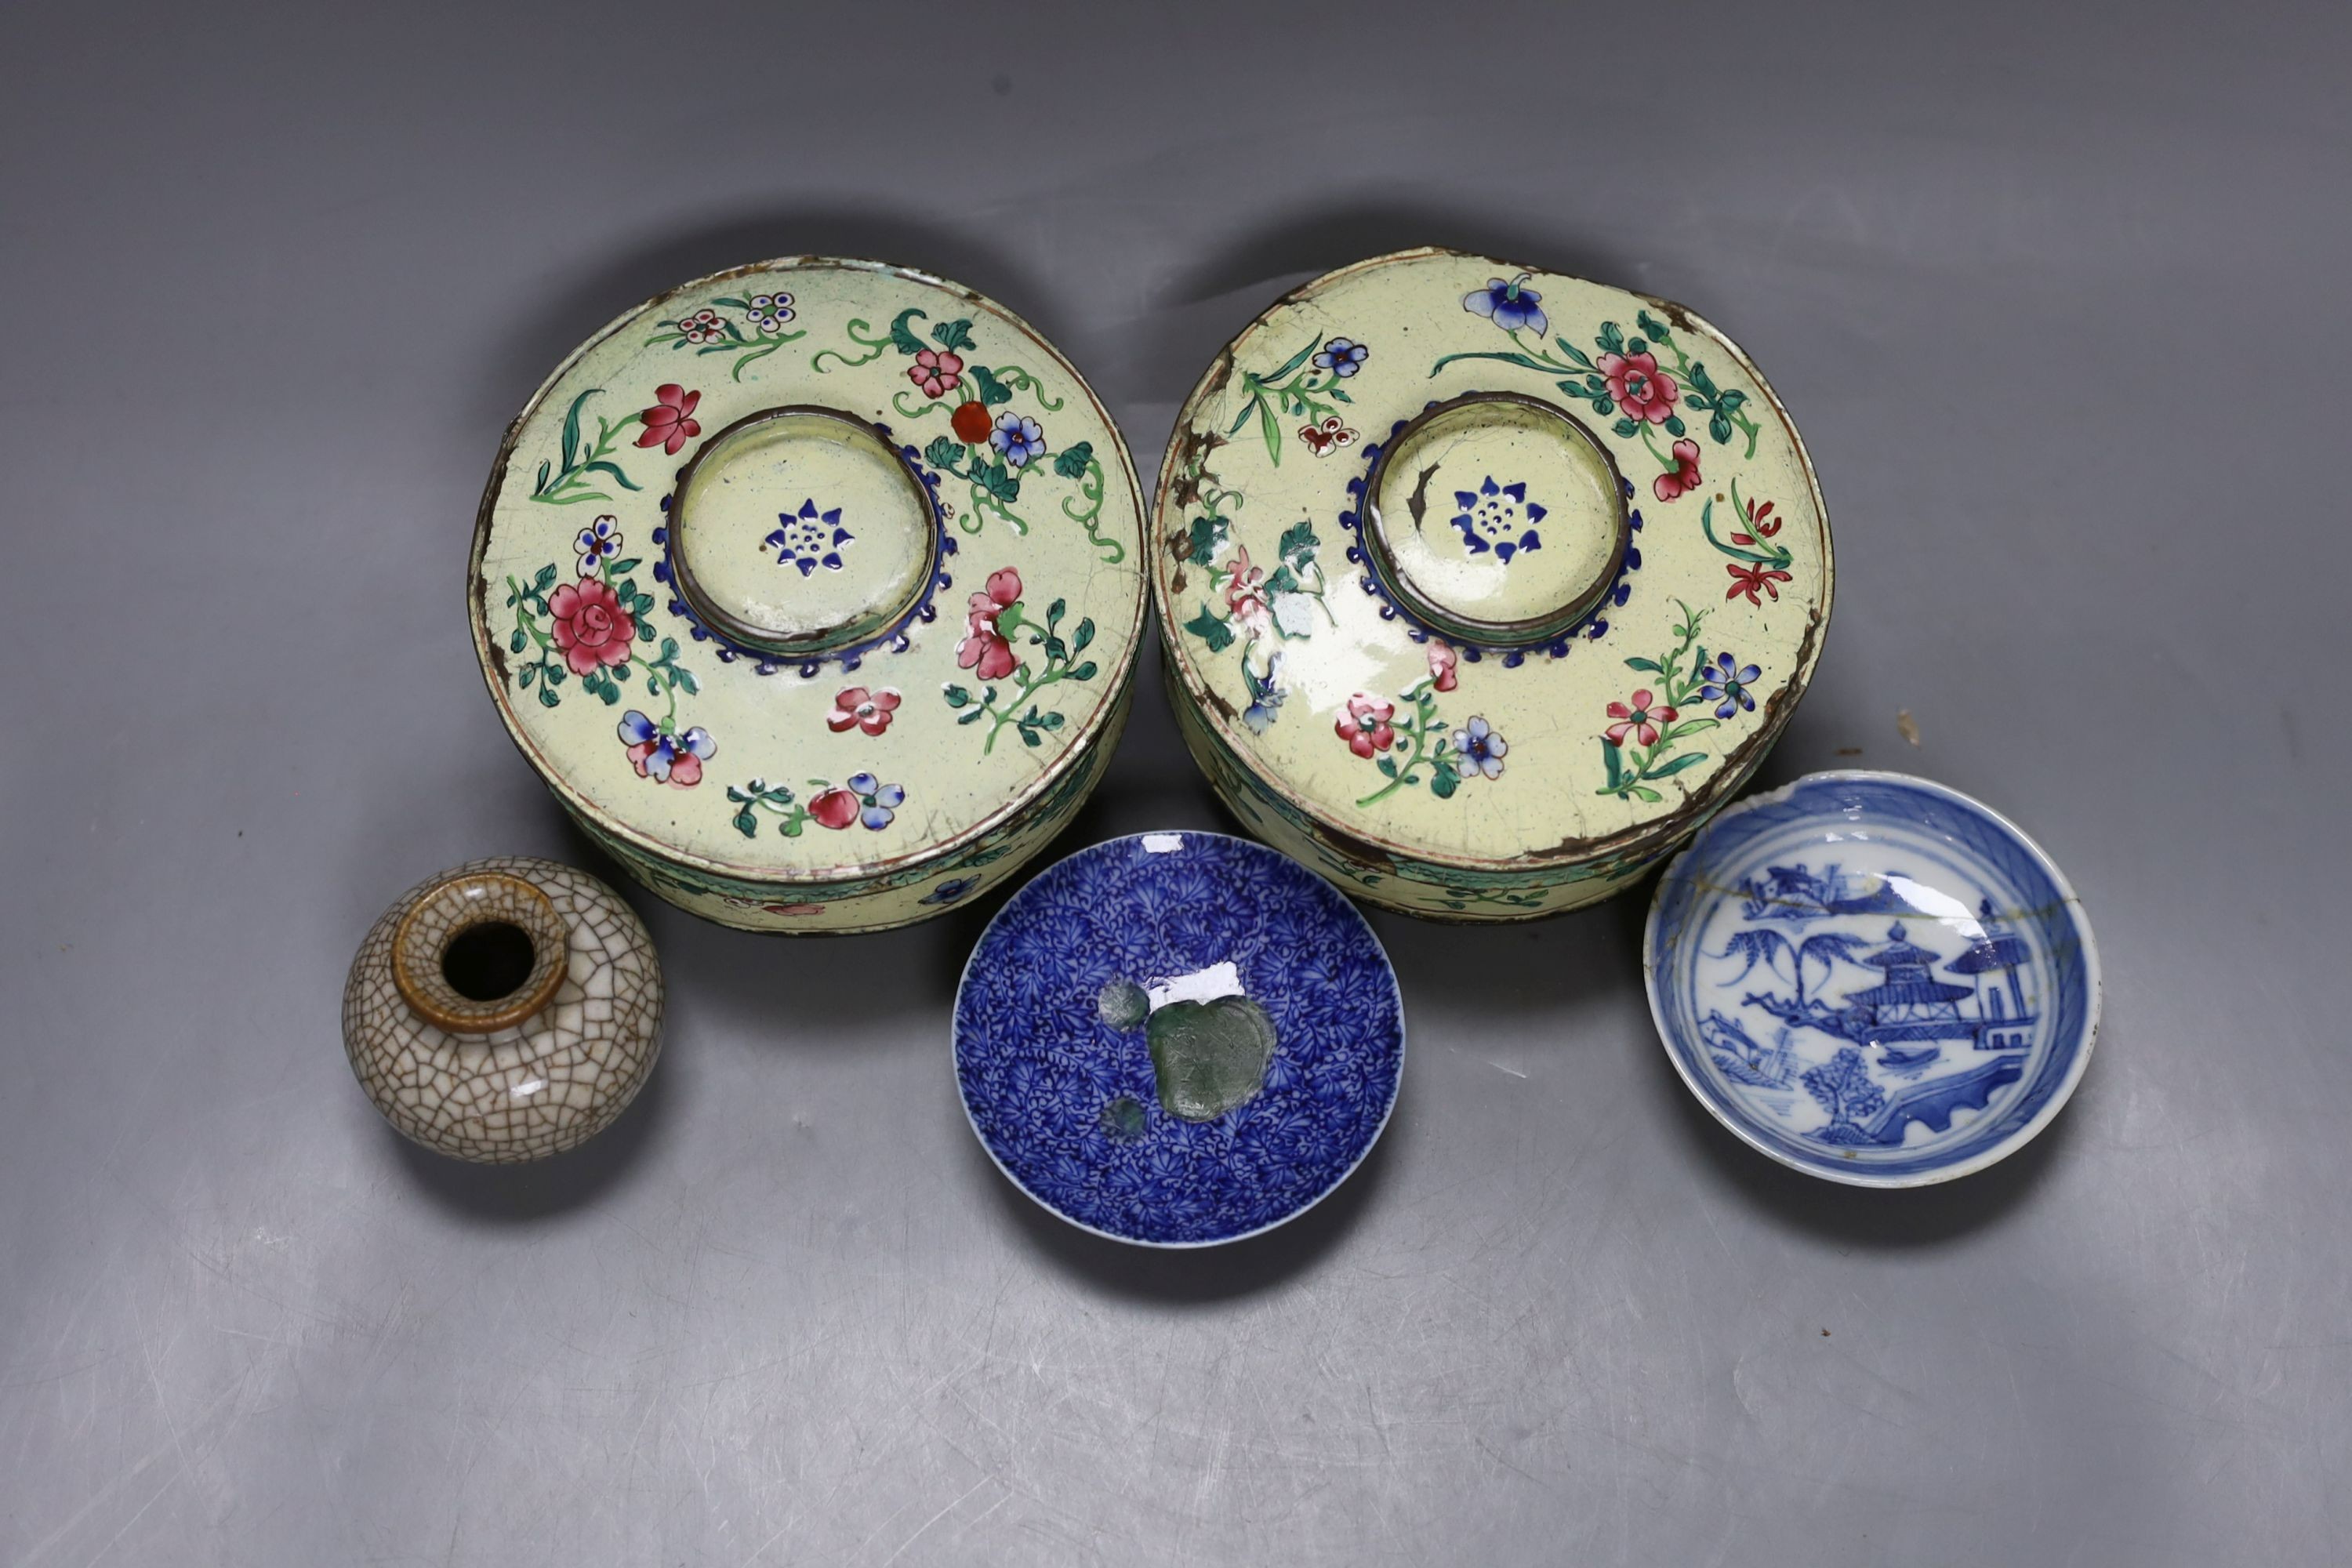 A pair of 18th/19th century Chinese Canton enamel bowls and covers, together with a Chinese miniature crackle glaze vase and other ceramics (5)